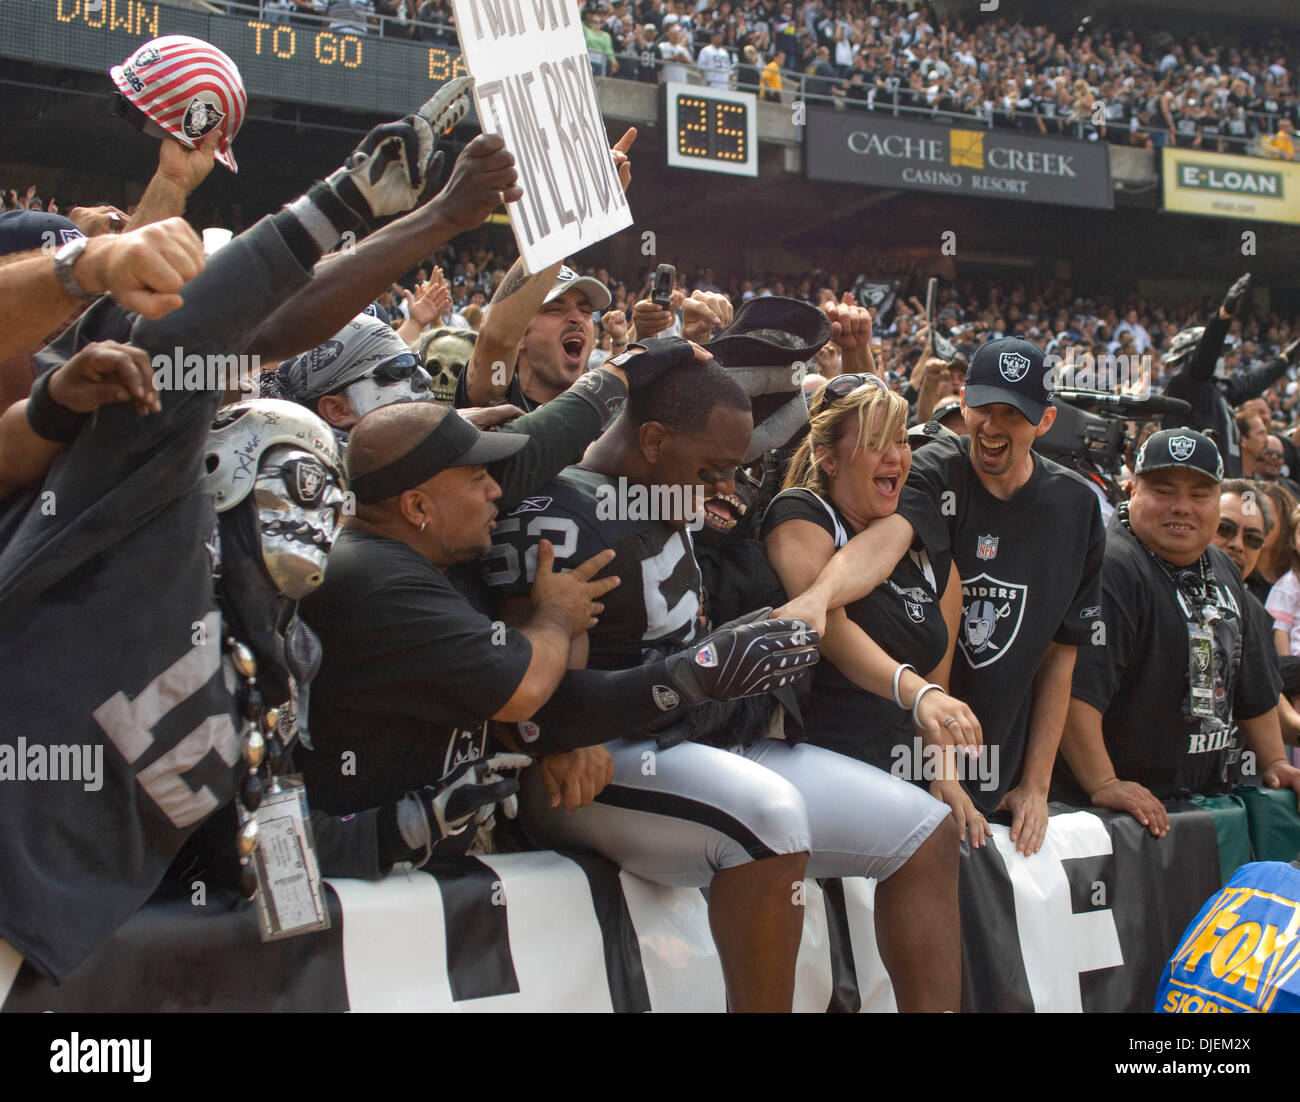 Sep 09, 2007 - OAKLAND, CA, USA - Oakland Raiders linebacker KIRK MORRISON  #52 jumps into the 'Black Hole' of McAfee Coliseum before the start of the  game against the Detroit Lions. (